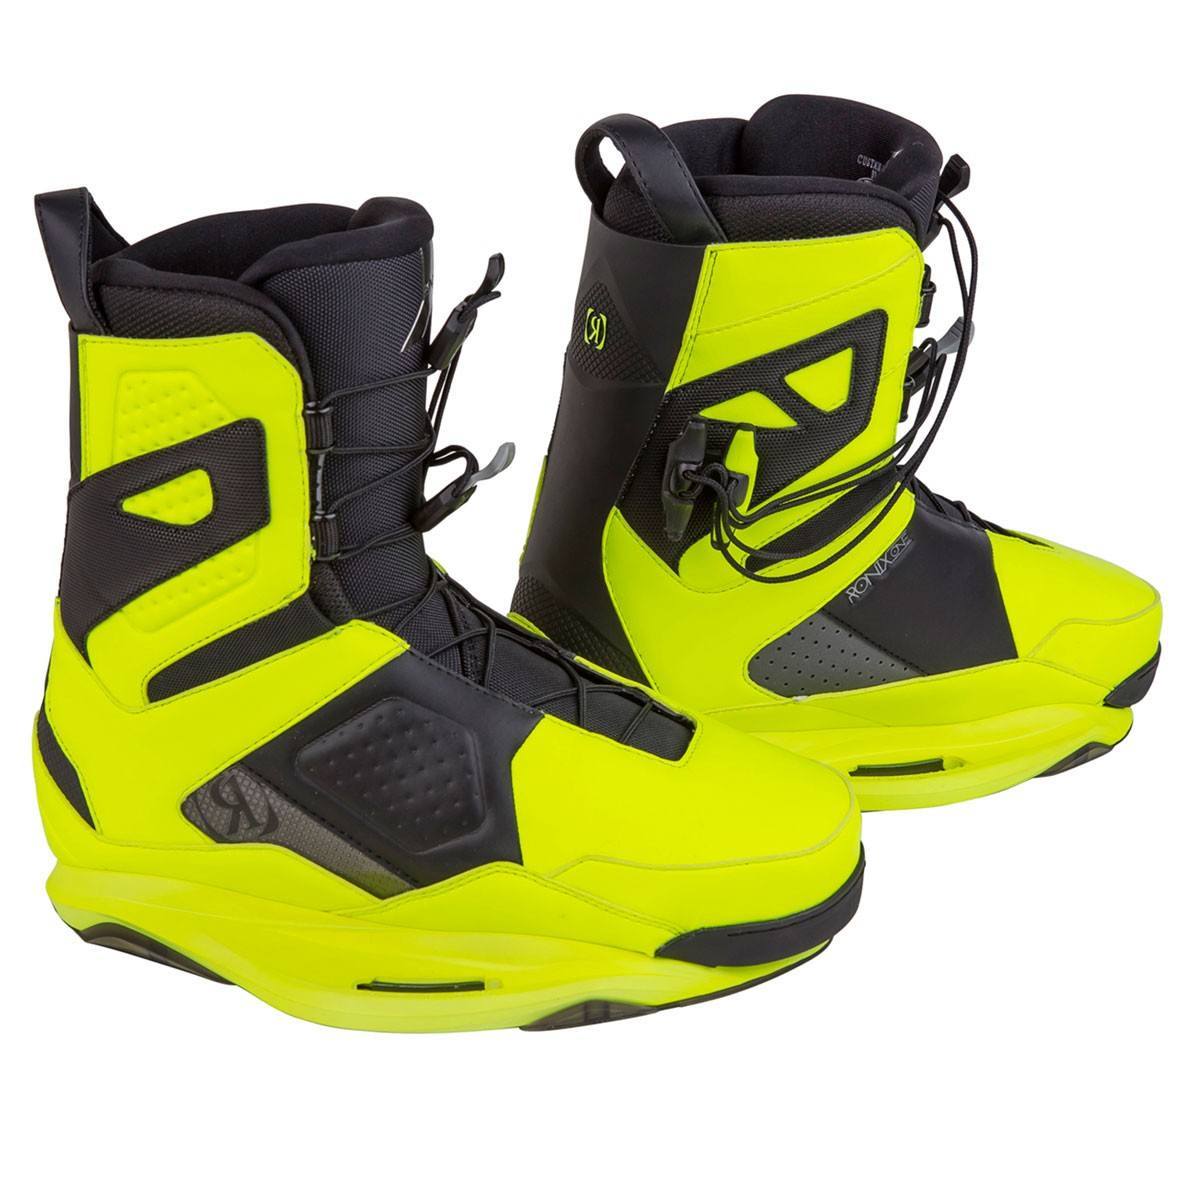 2015-ronix-boots-one-yellow-02